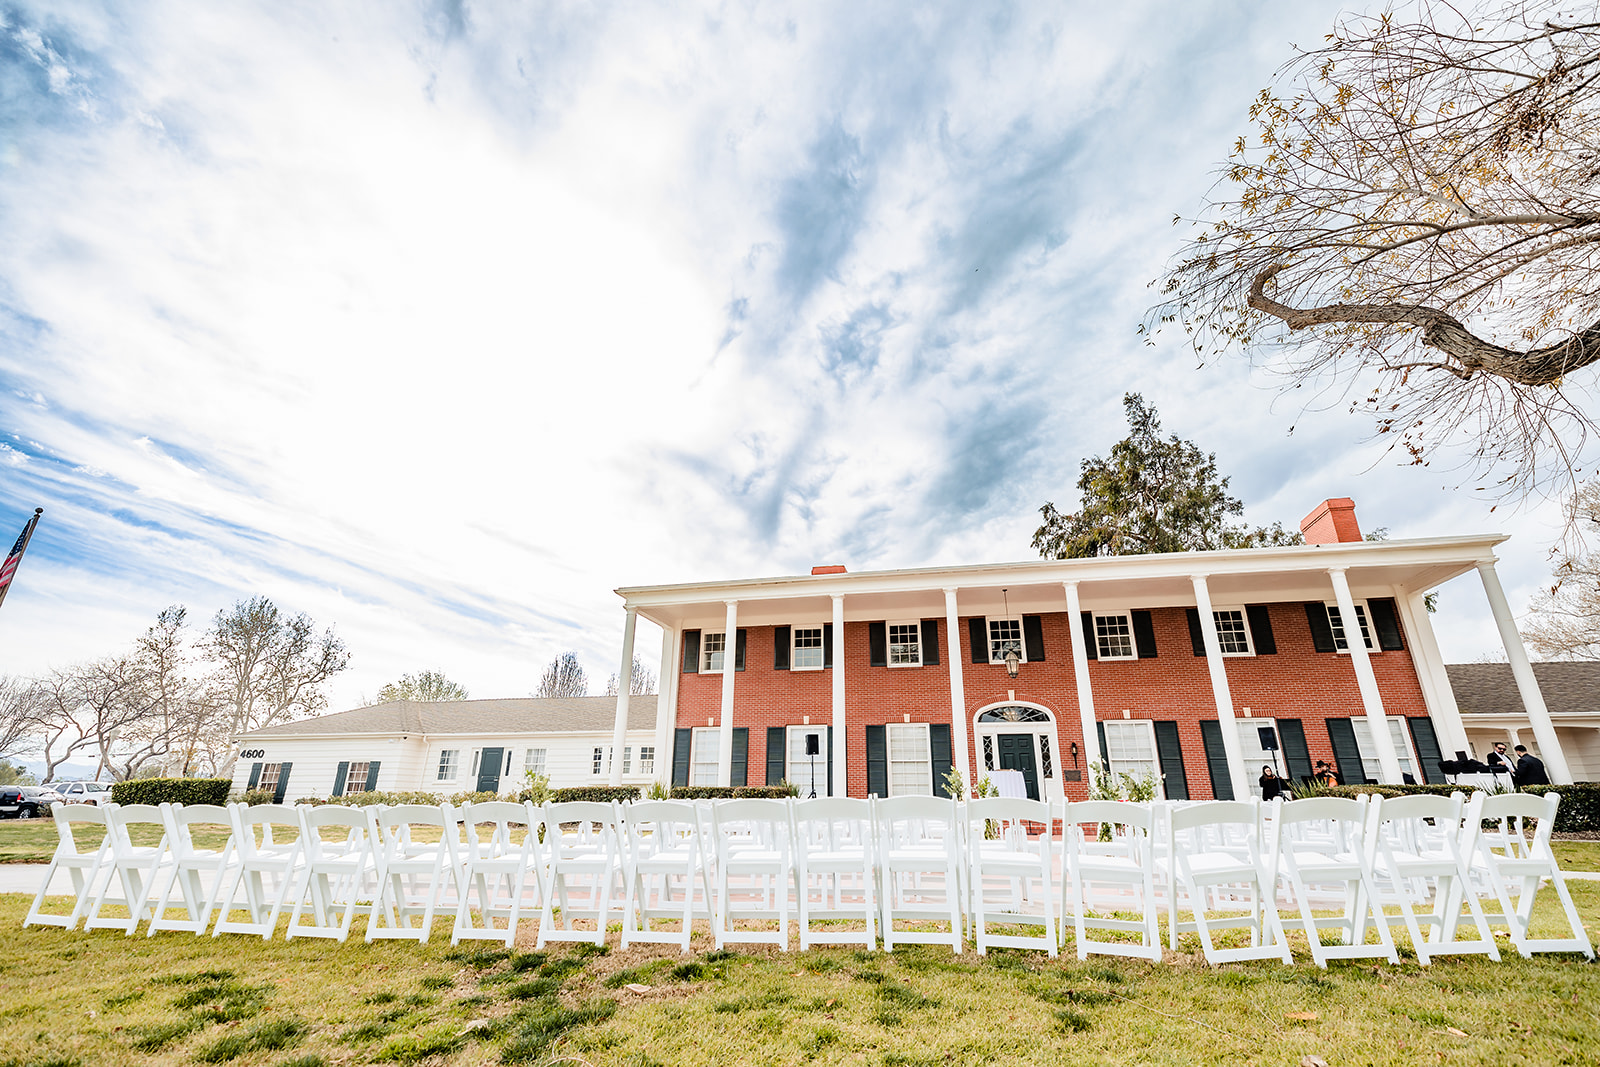 Ceremony on the lawn in front of Crestmore Manor